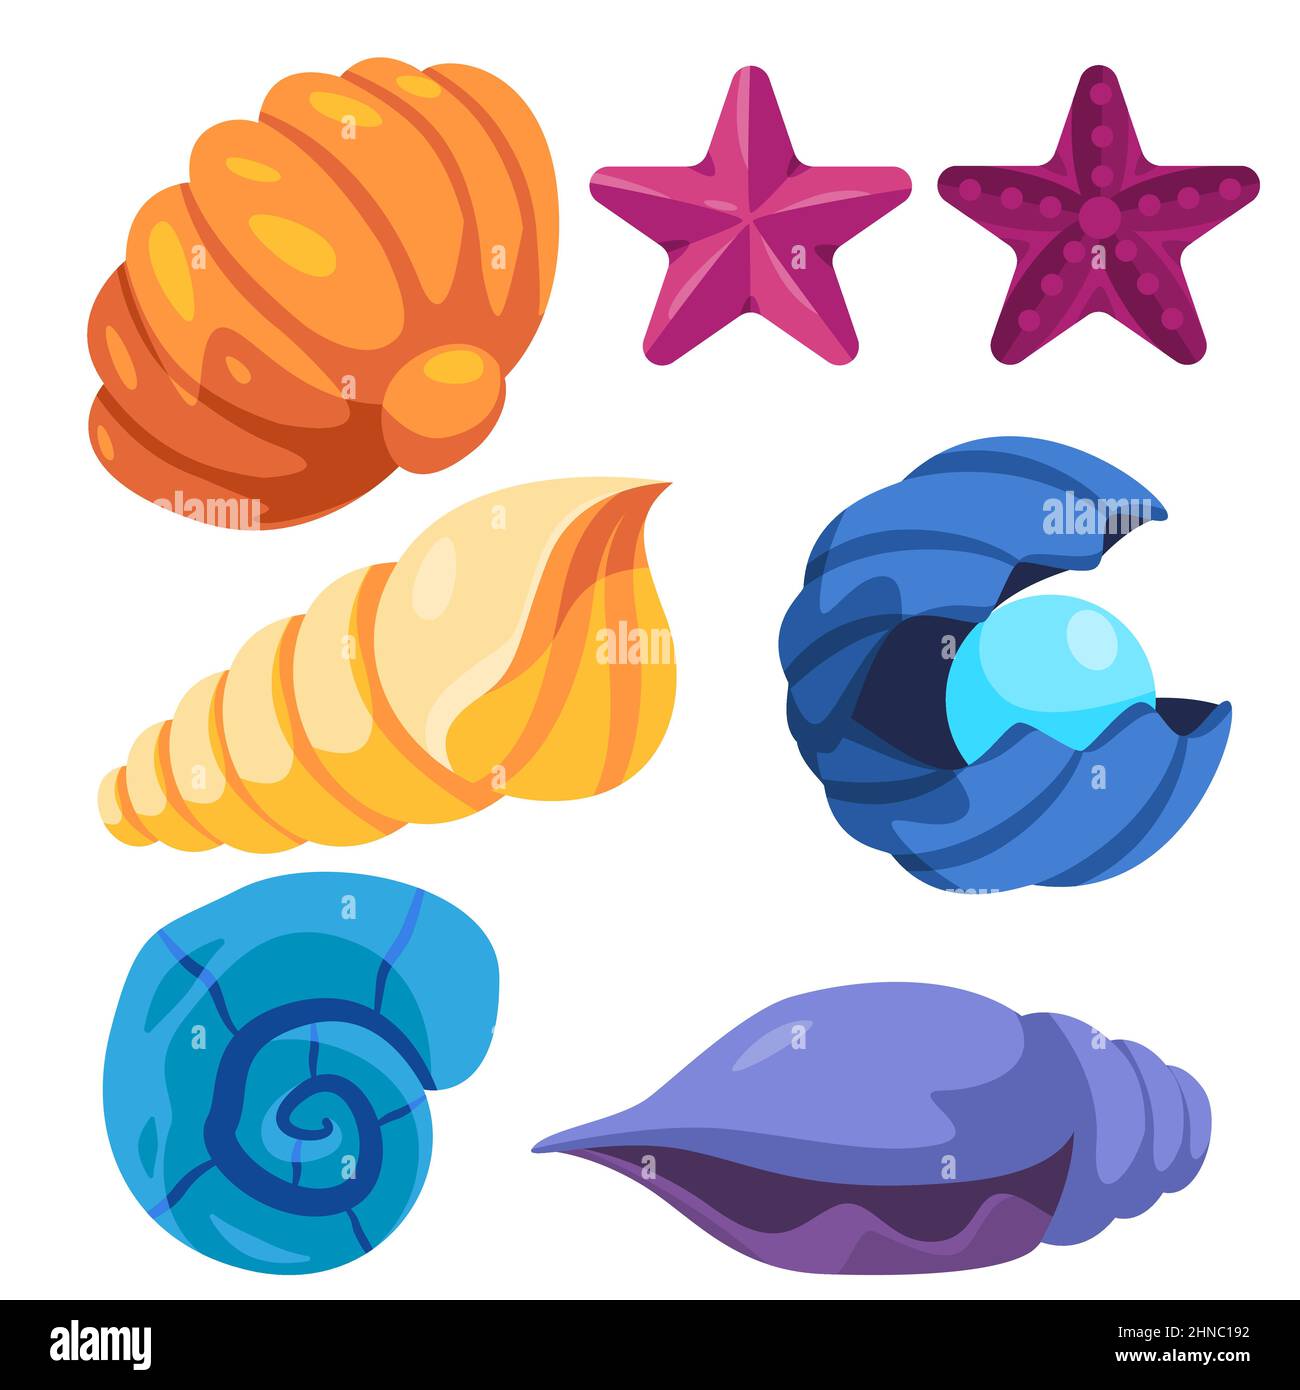 sea shell mollusk clam starfish snail underwater aquatic marine object illustration in colorful nature Stock Vector